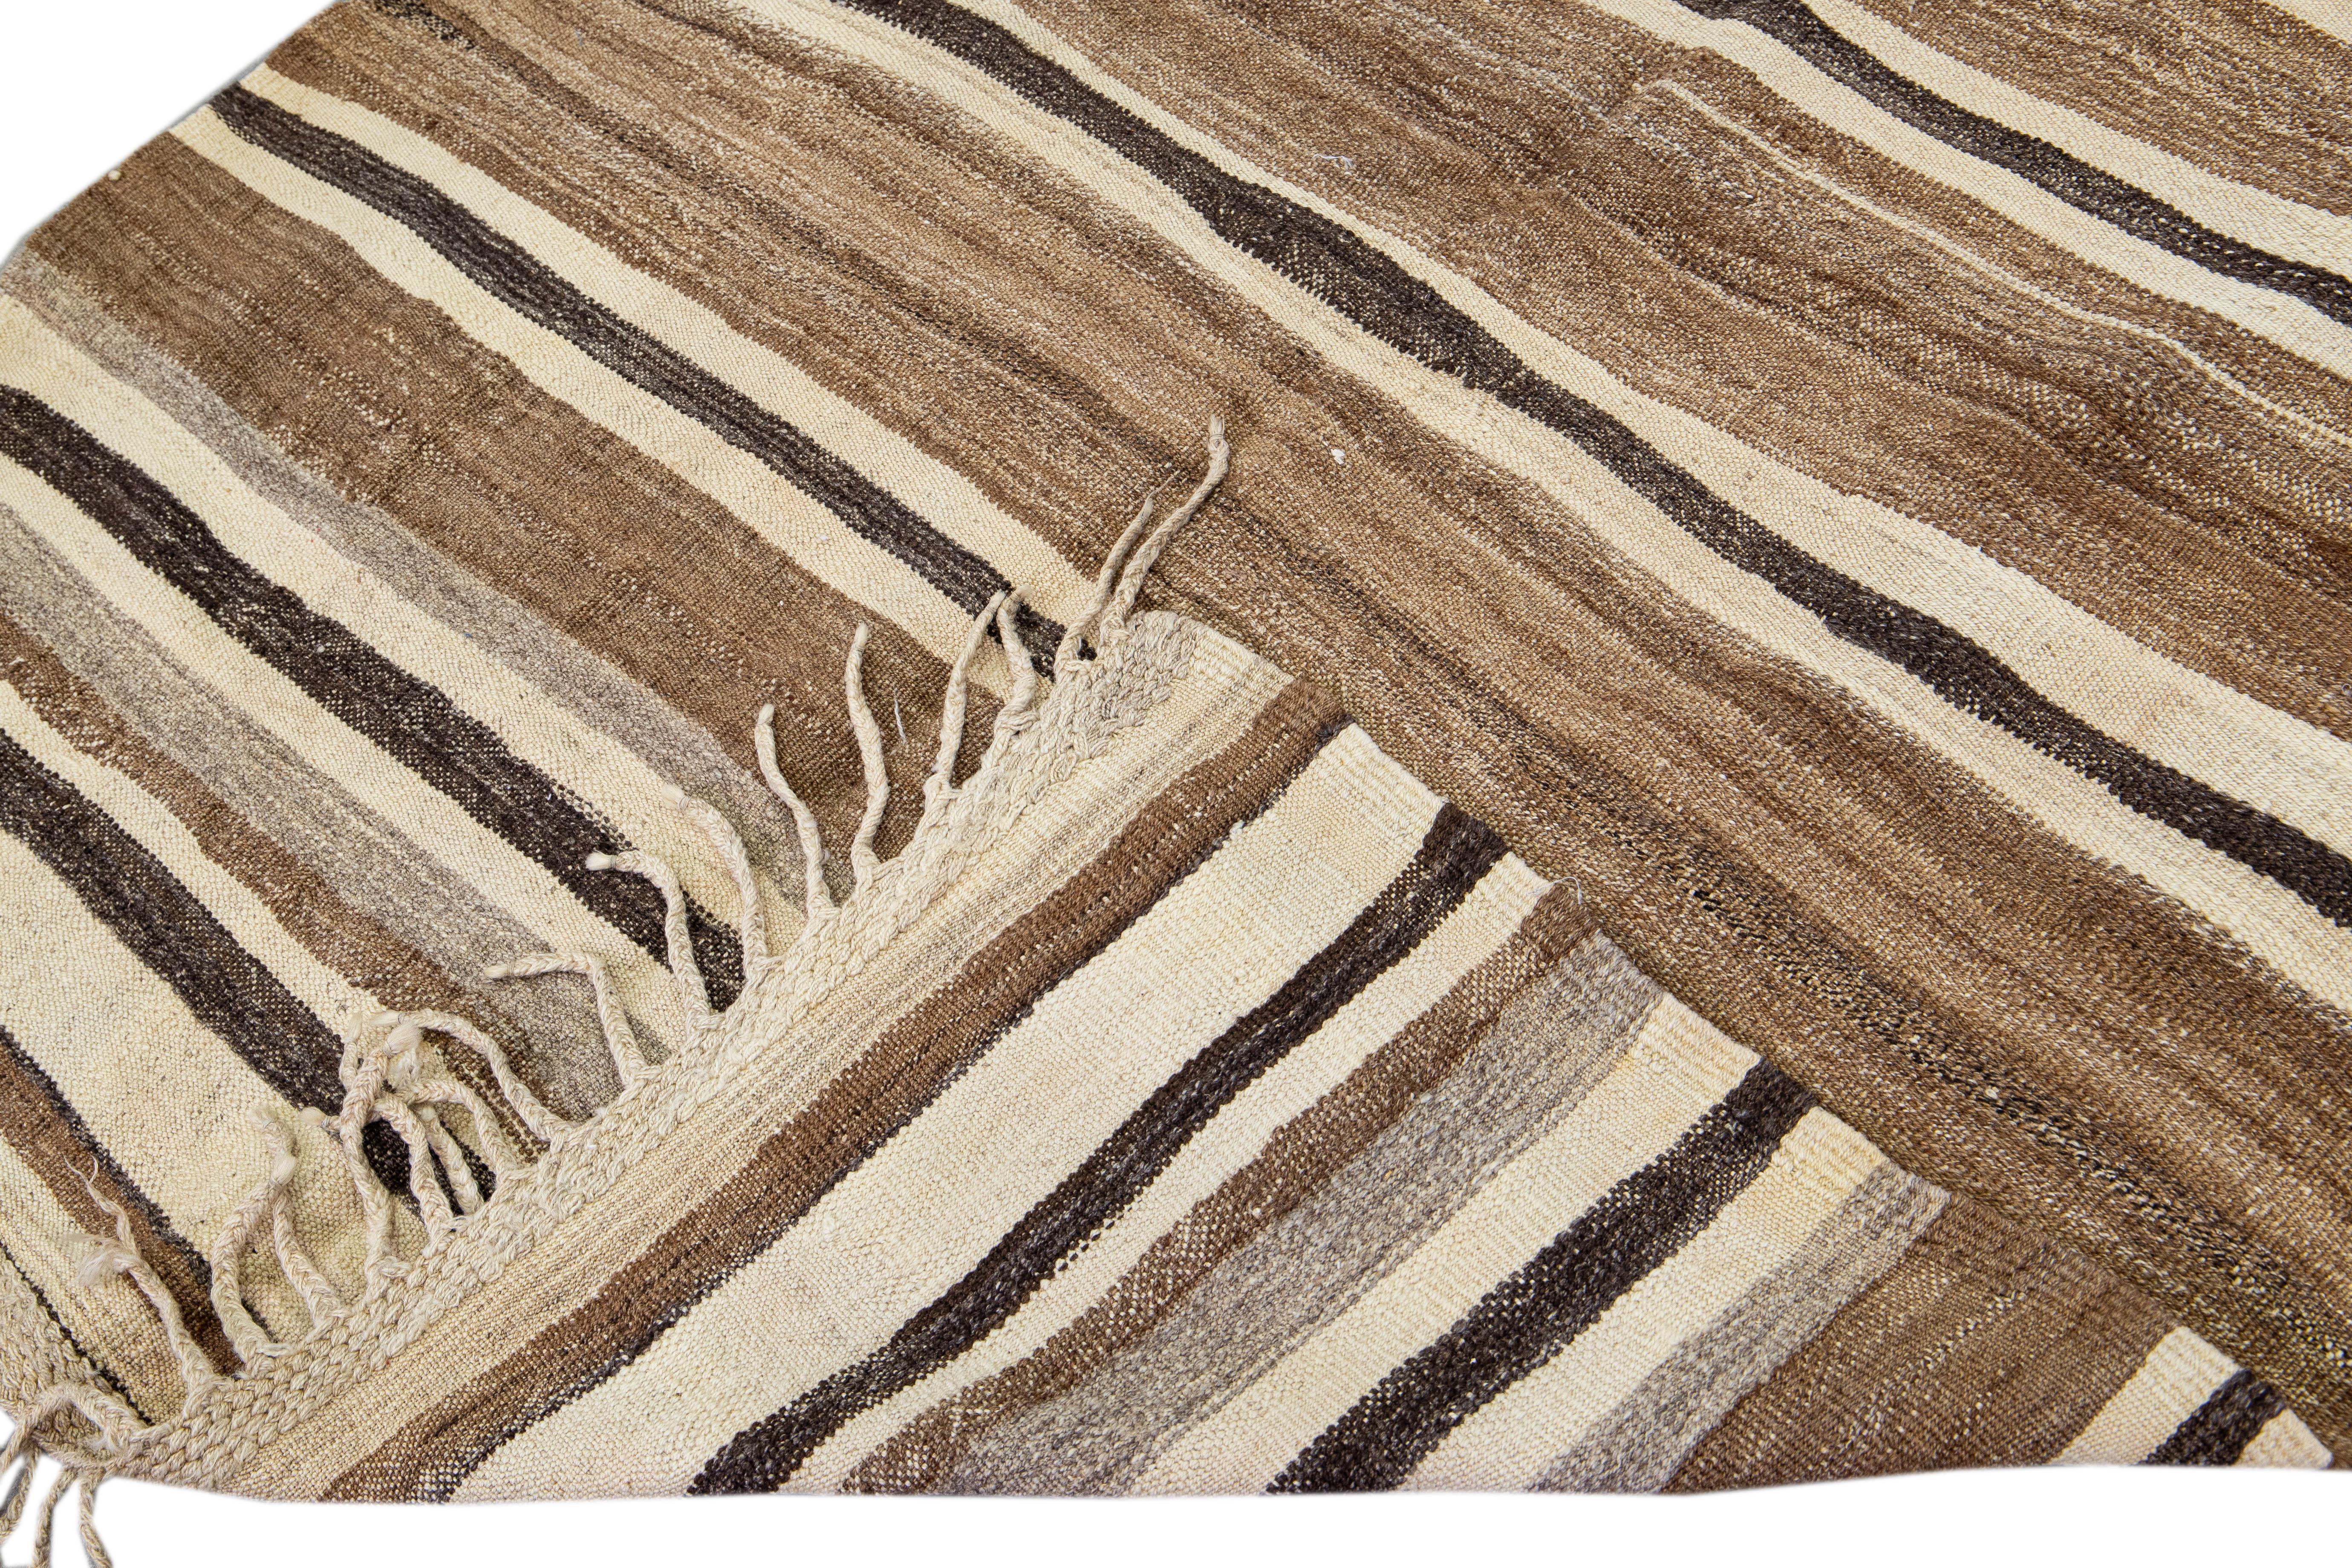 Beautiful kilim handmade wool rug with a brown field. This Vintage flatweave rug has beige Striped accents features a gorgeous all-over design with beige fringes.

This rug measures: 4'8